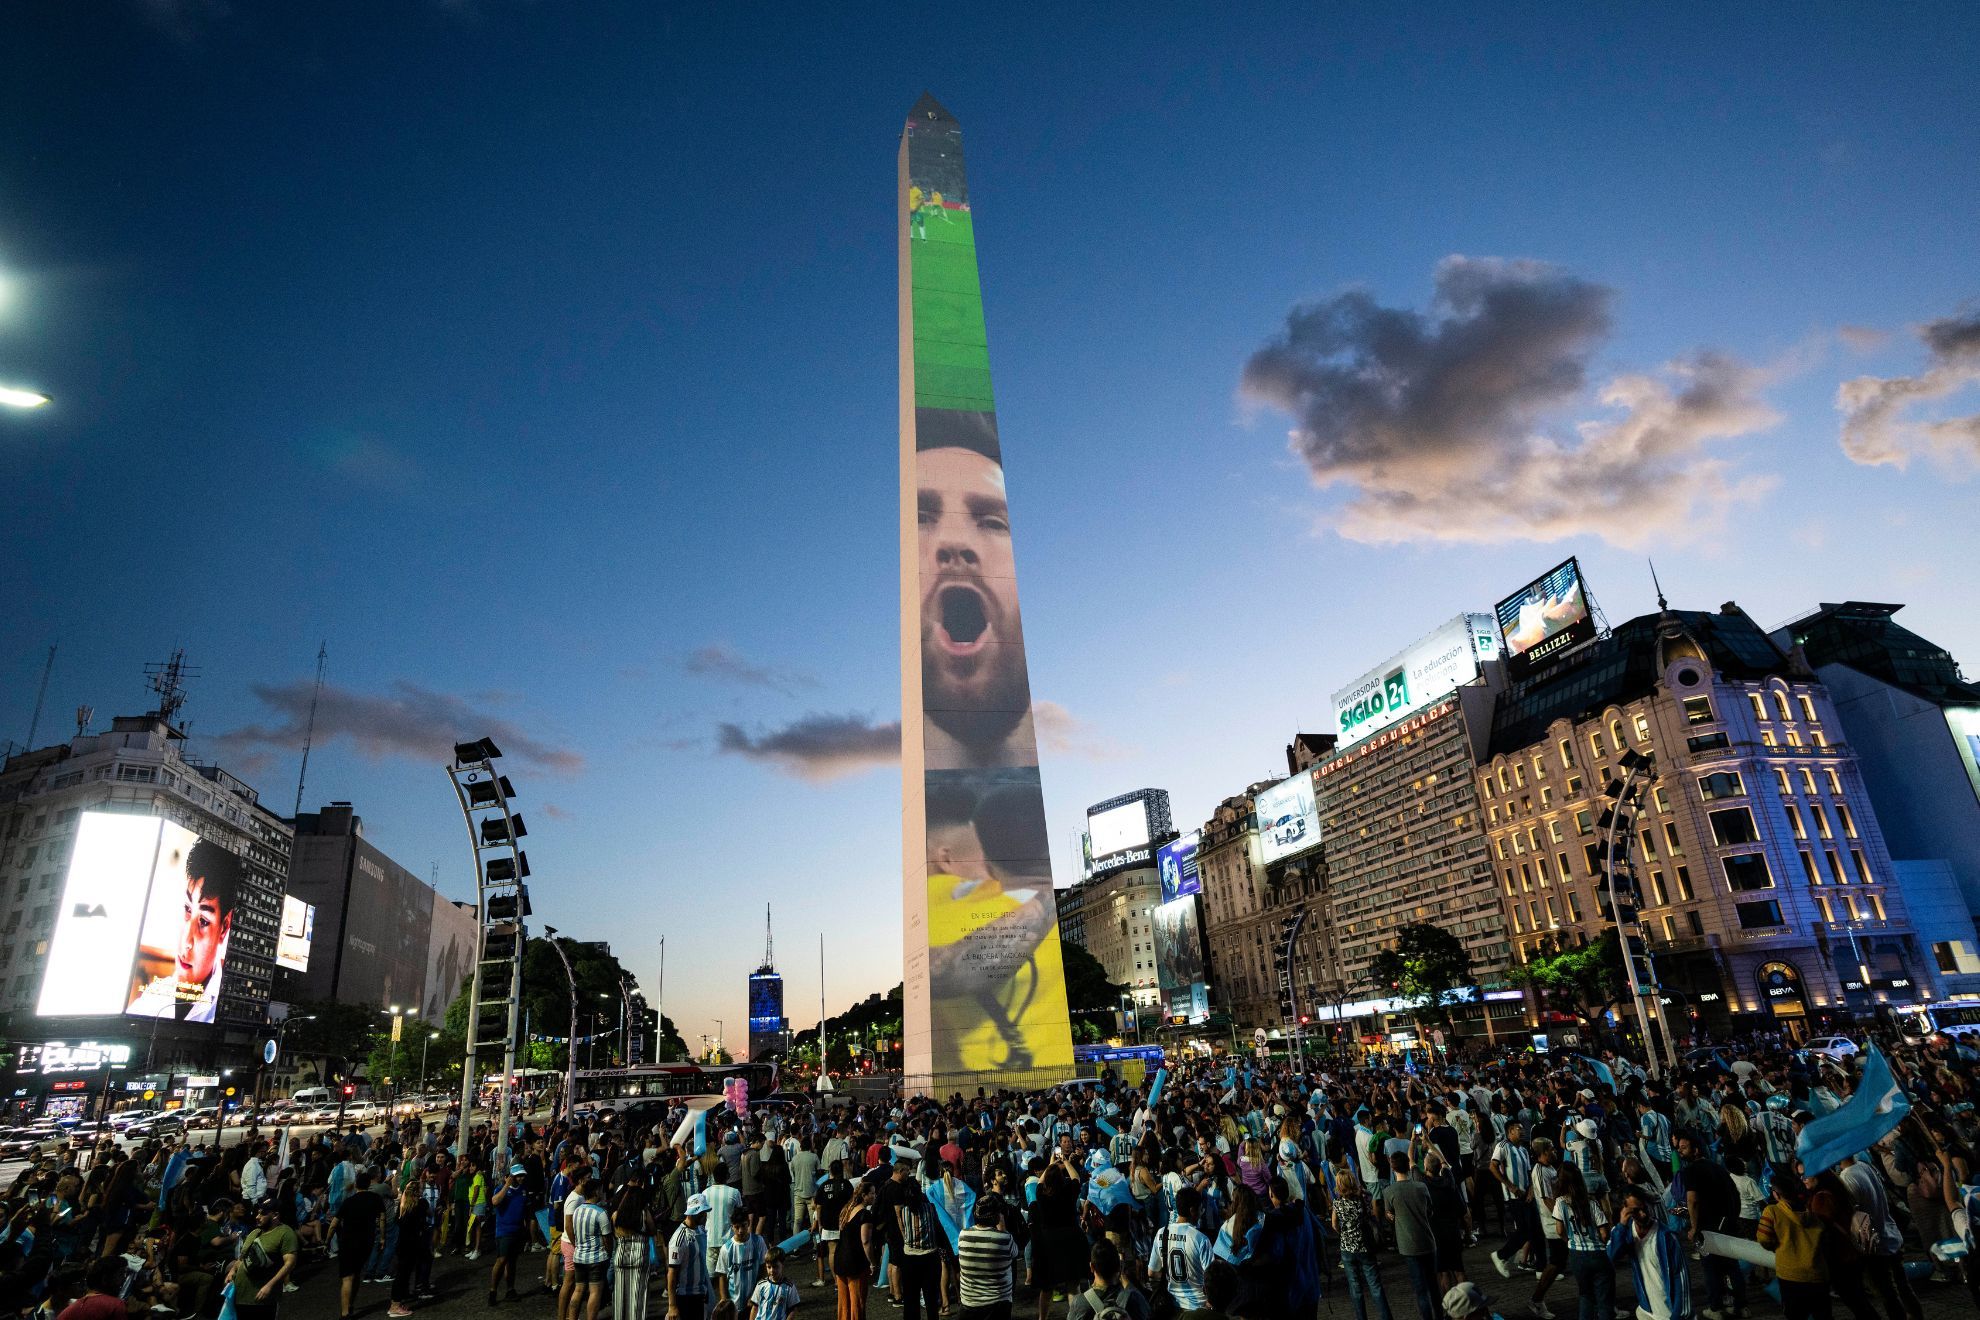 Argentina fans are getting free beer from Budweiser to continue celebrations